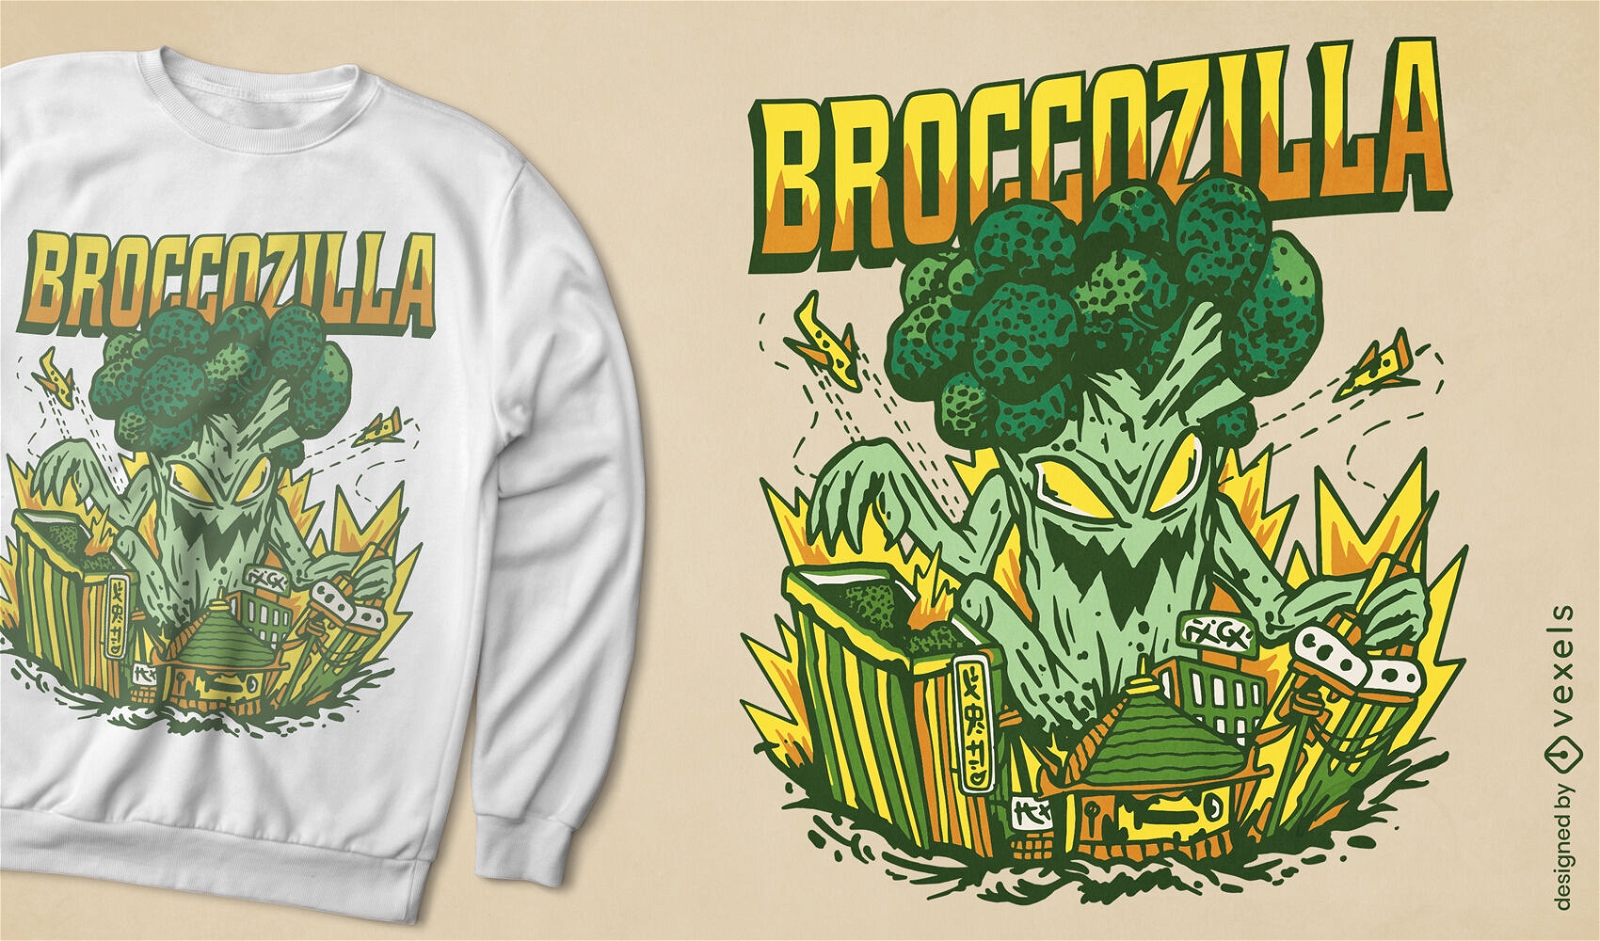 Giant broccoli attacking city t-shirt design